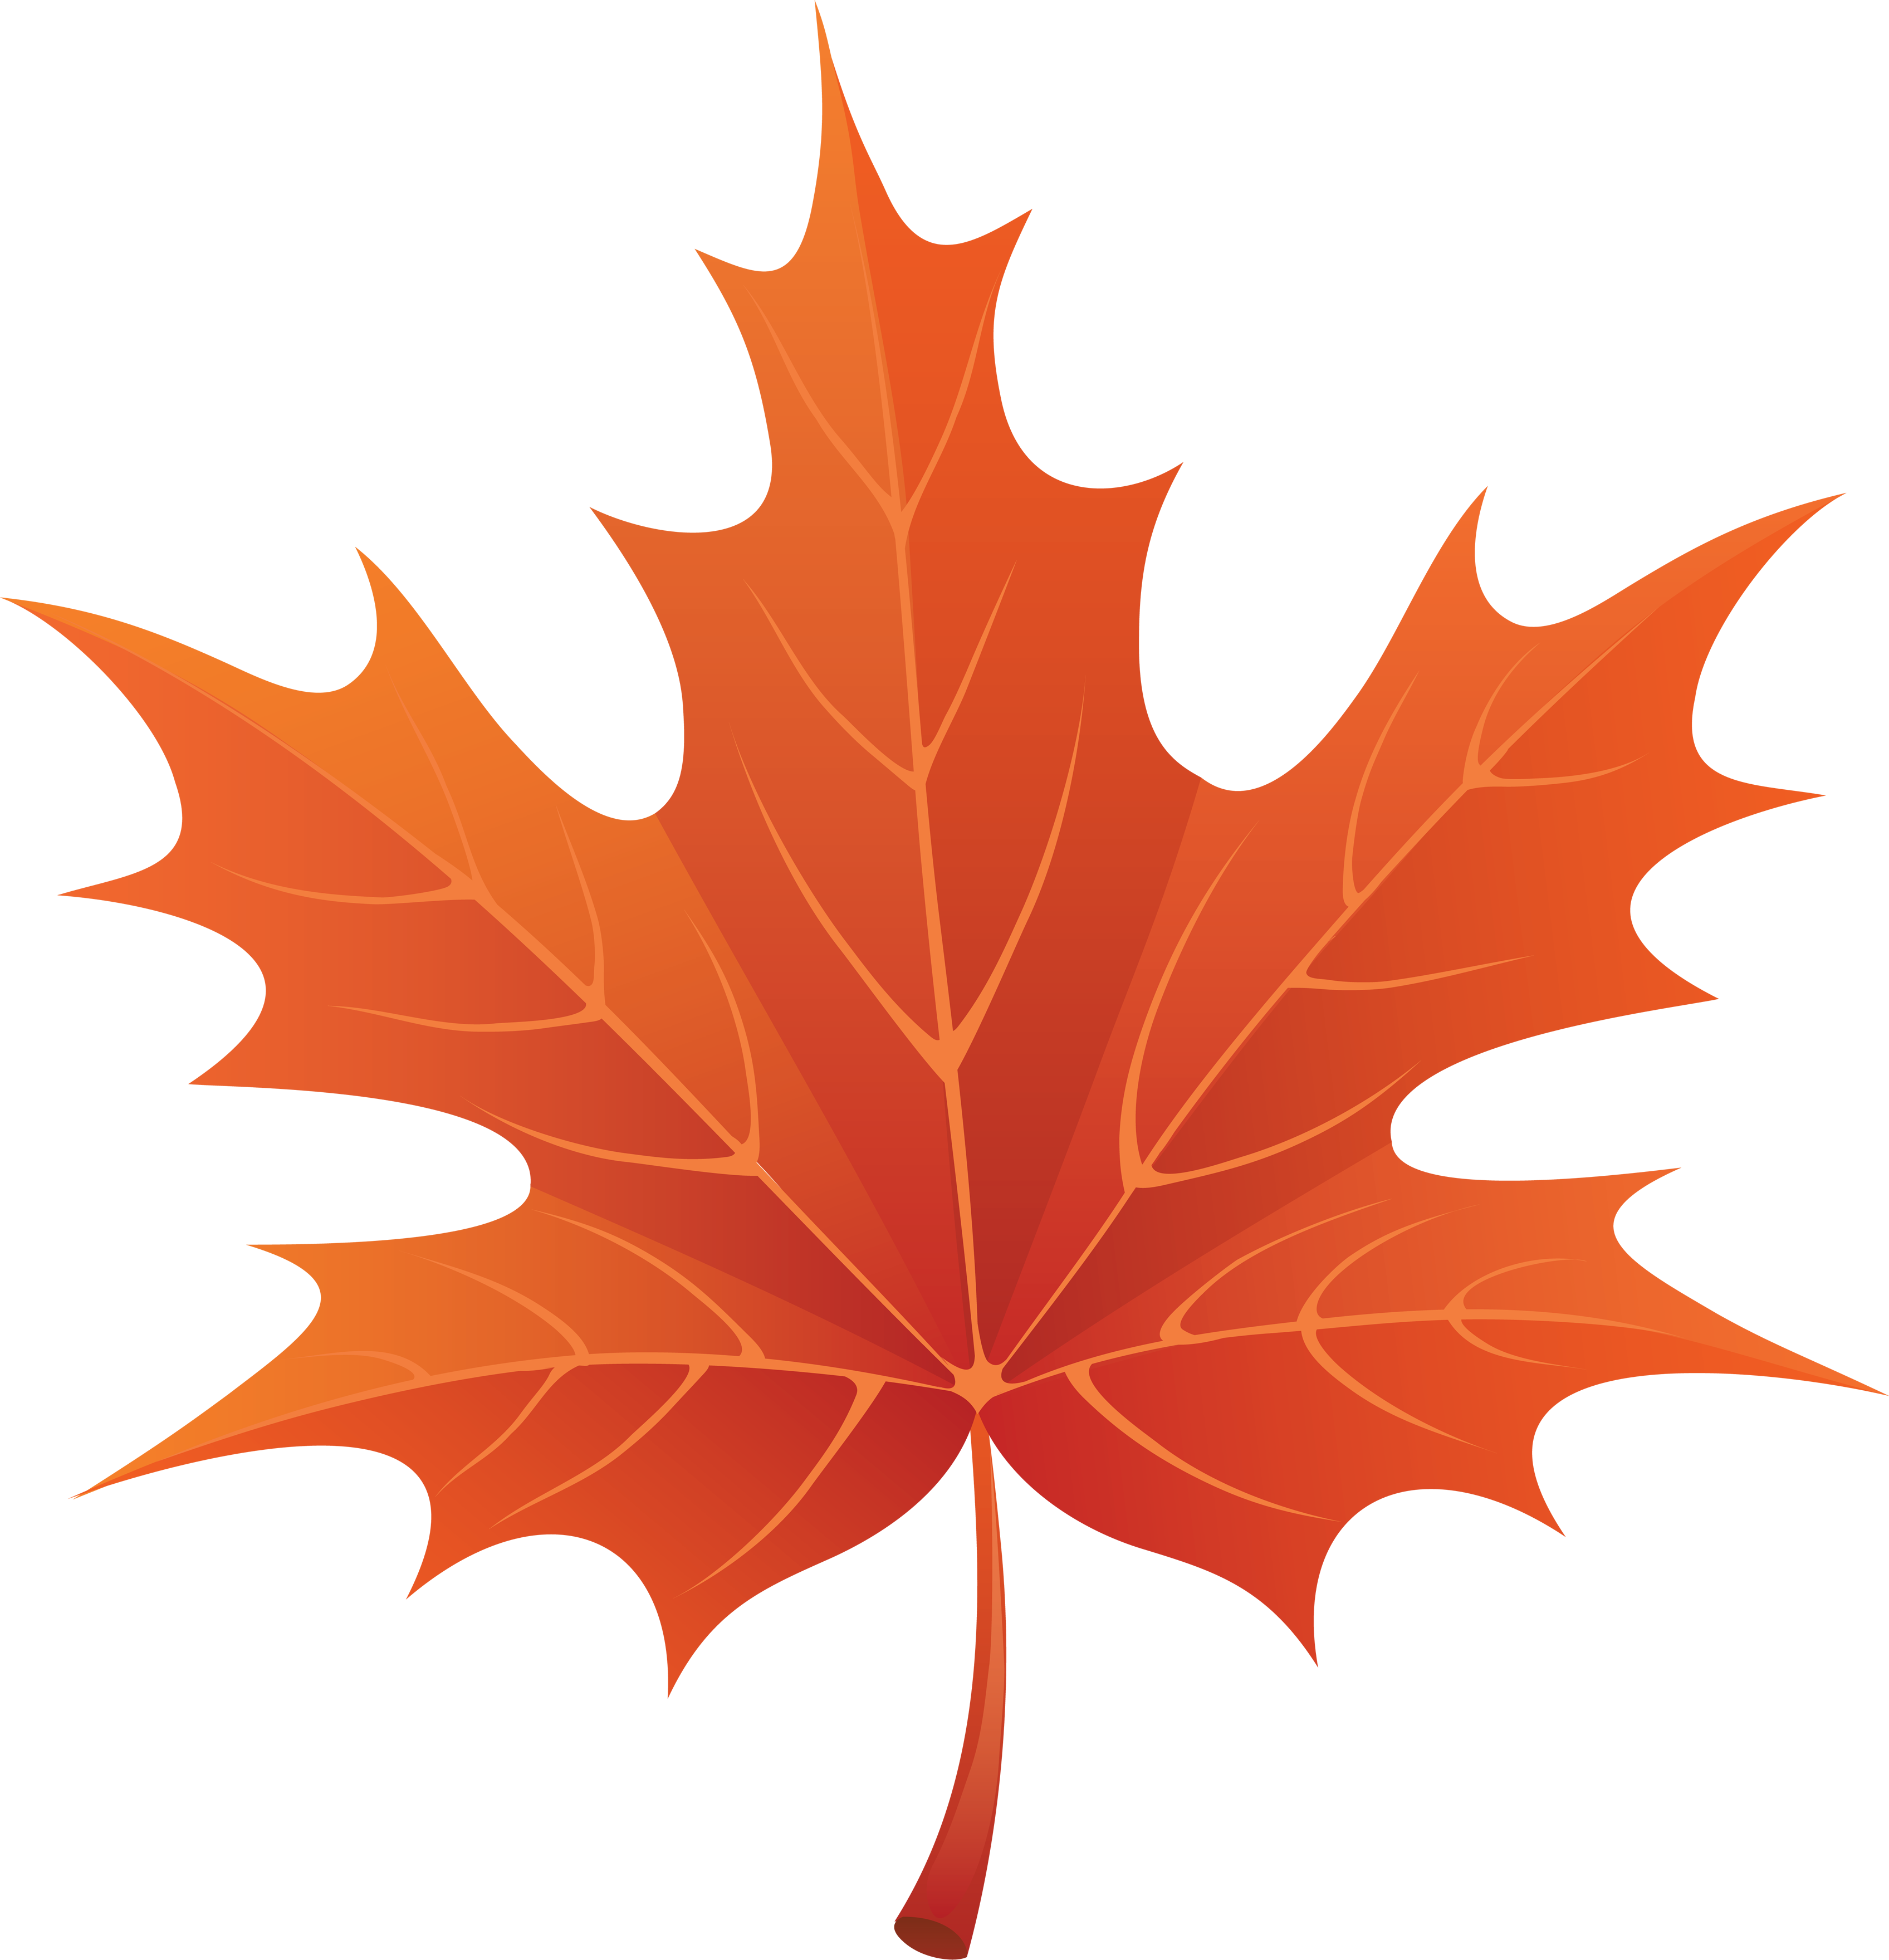 Clipart crown autumn. Fall leaves images free